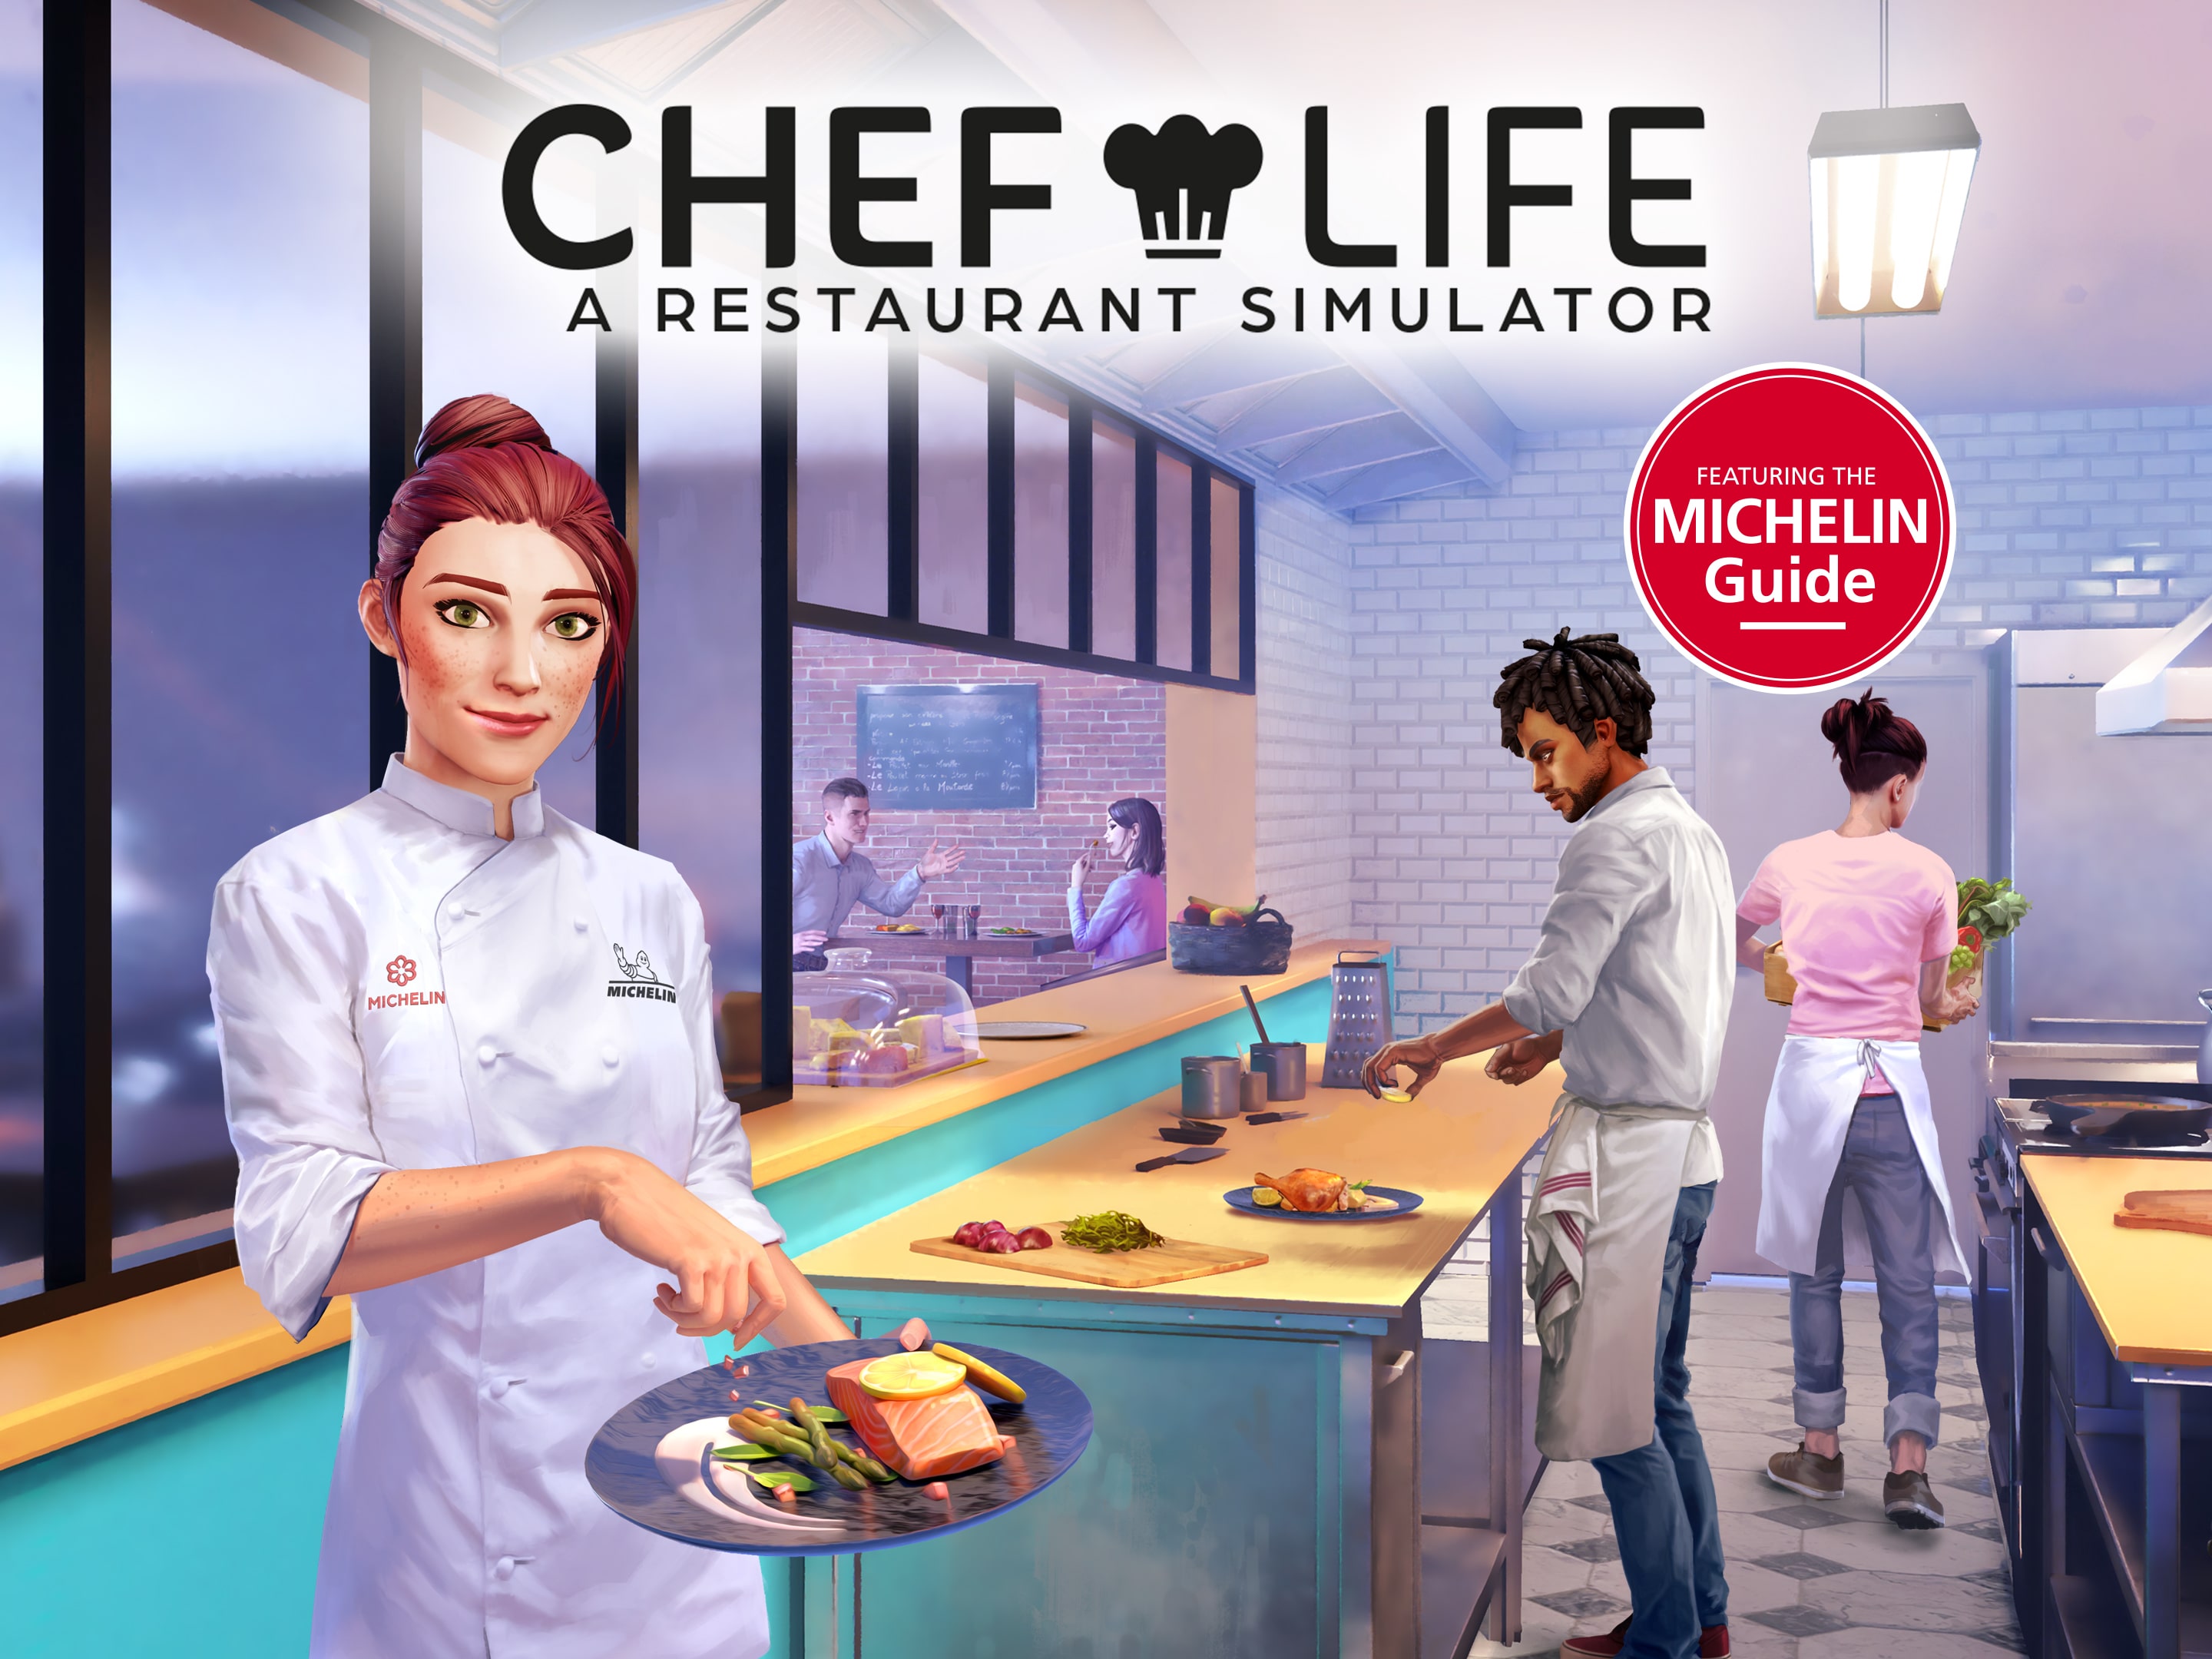 Chef Life - AL FORNO PACK - Epic Games Store